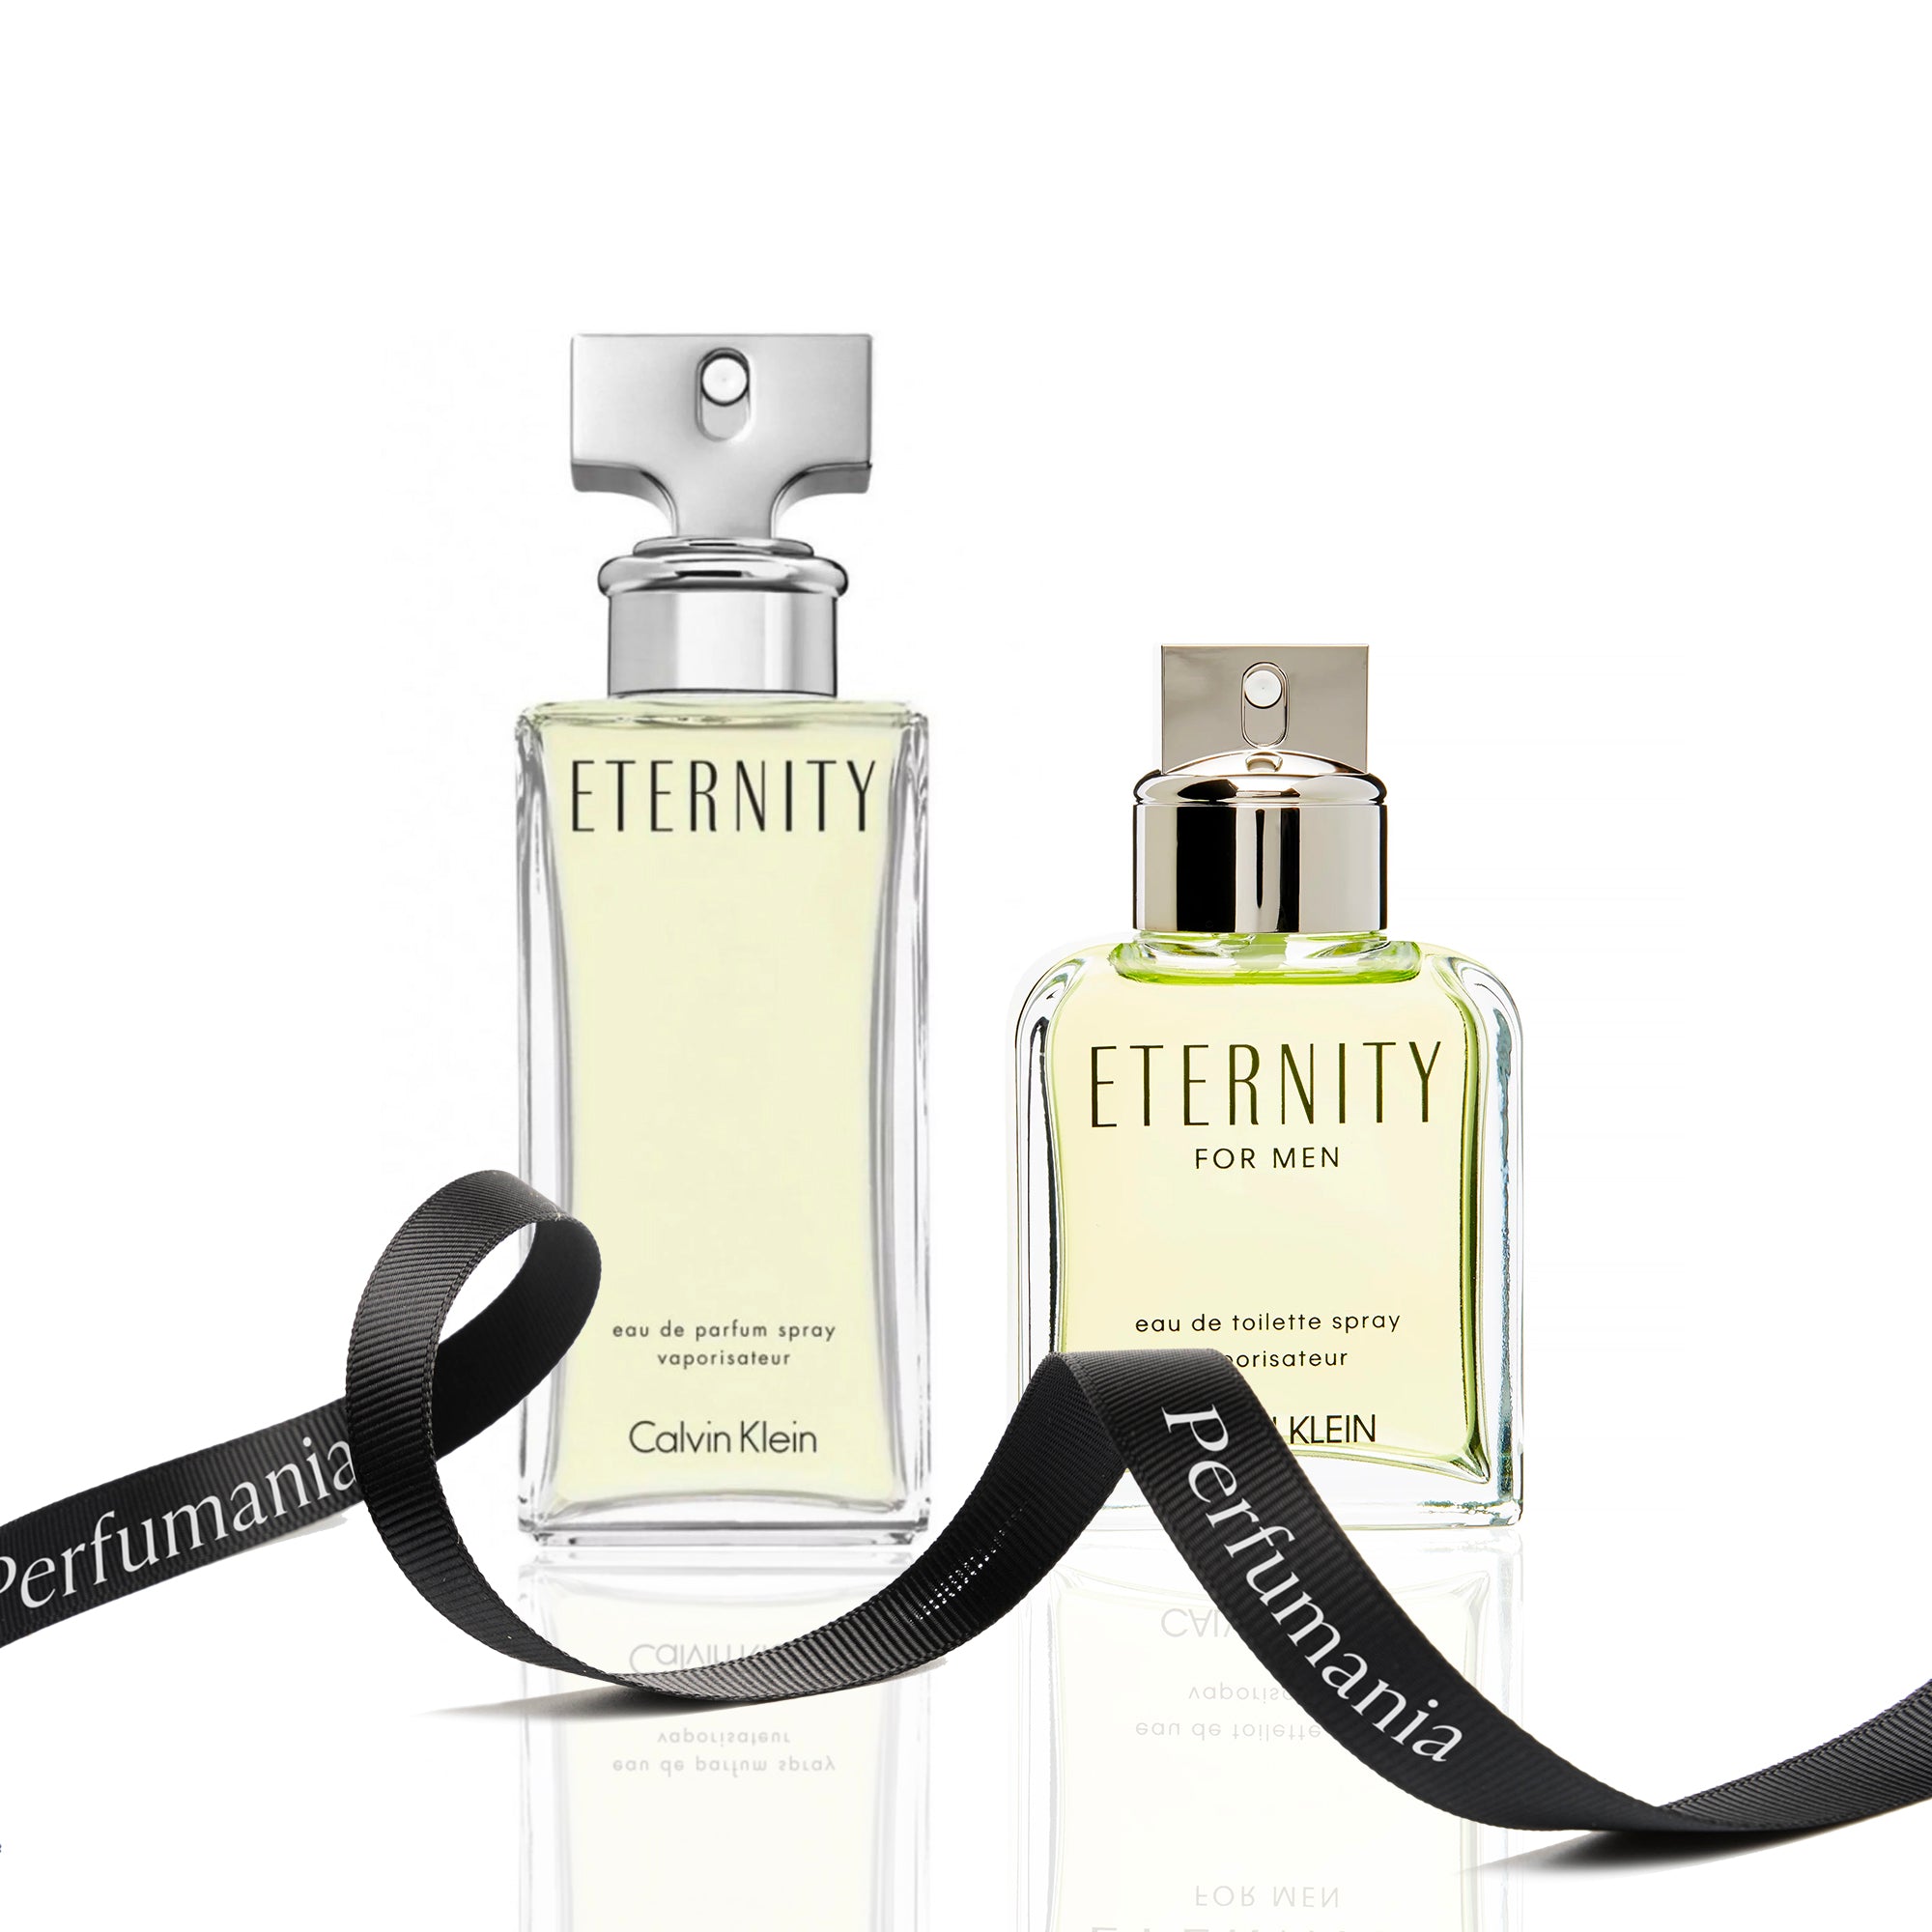 Bundle Deal His & Hers: Eternity by Calvin Klein for Men and Women Featured image